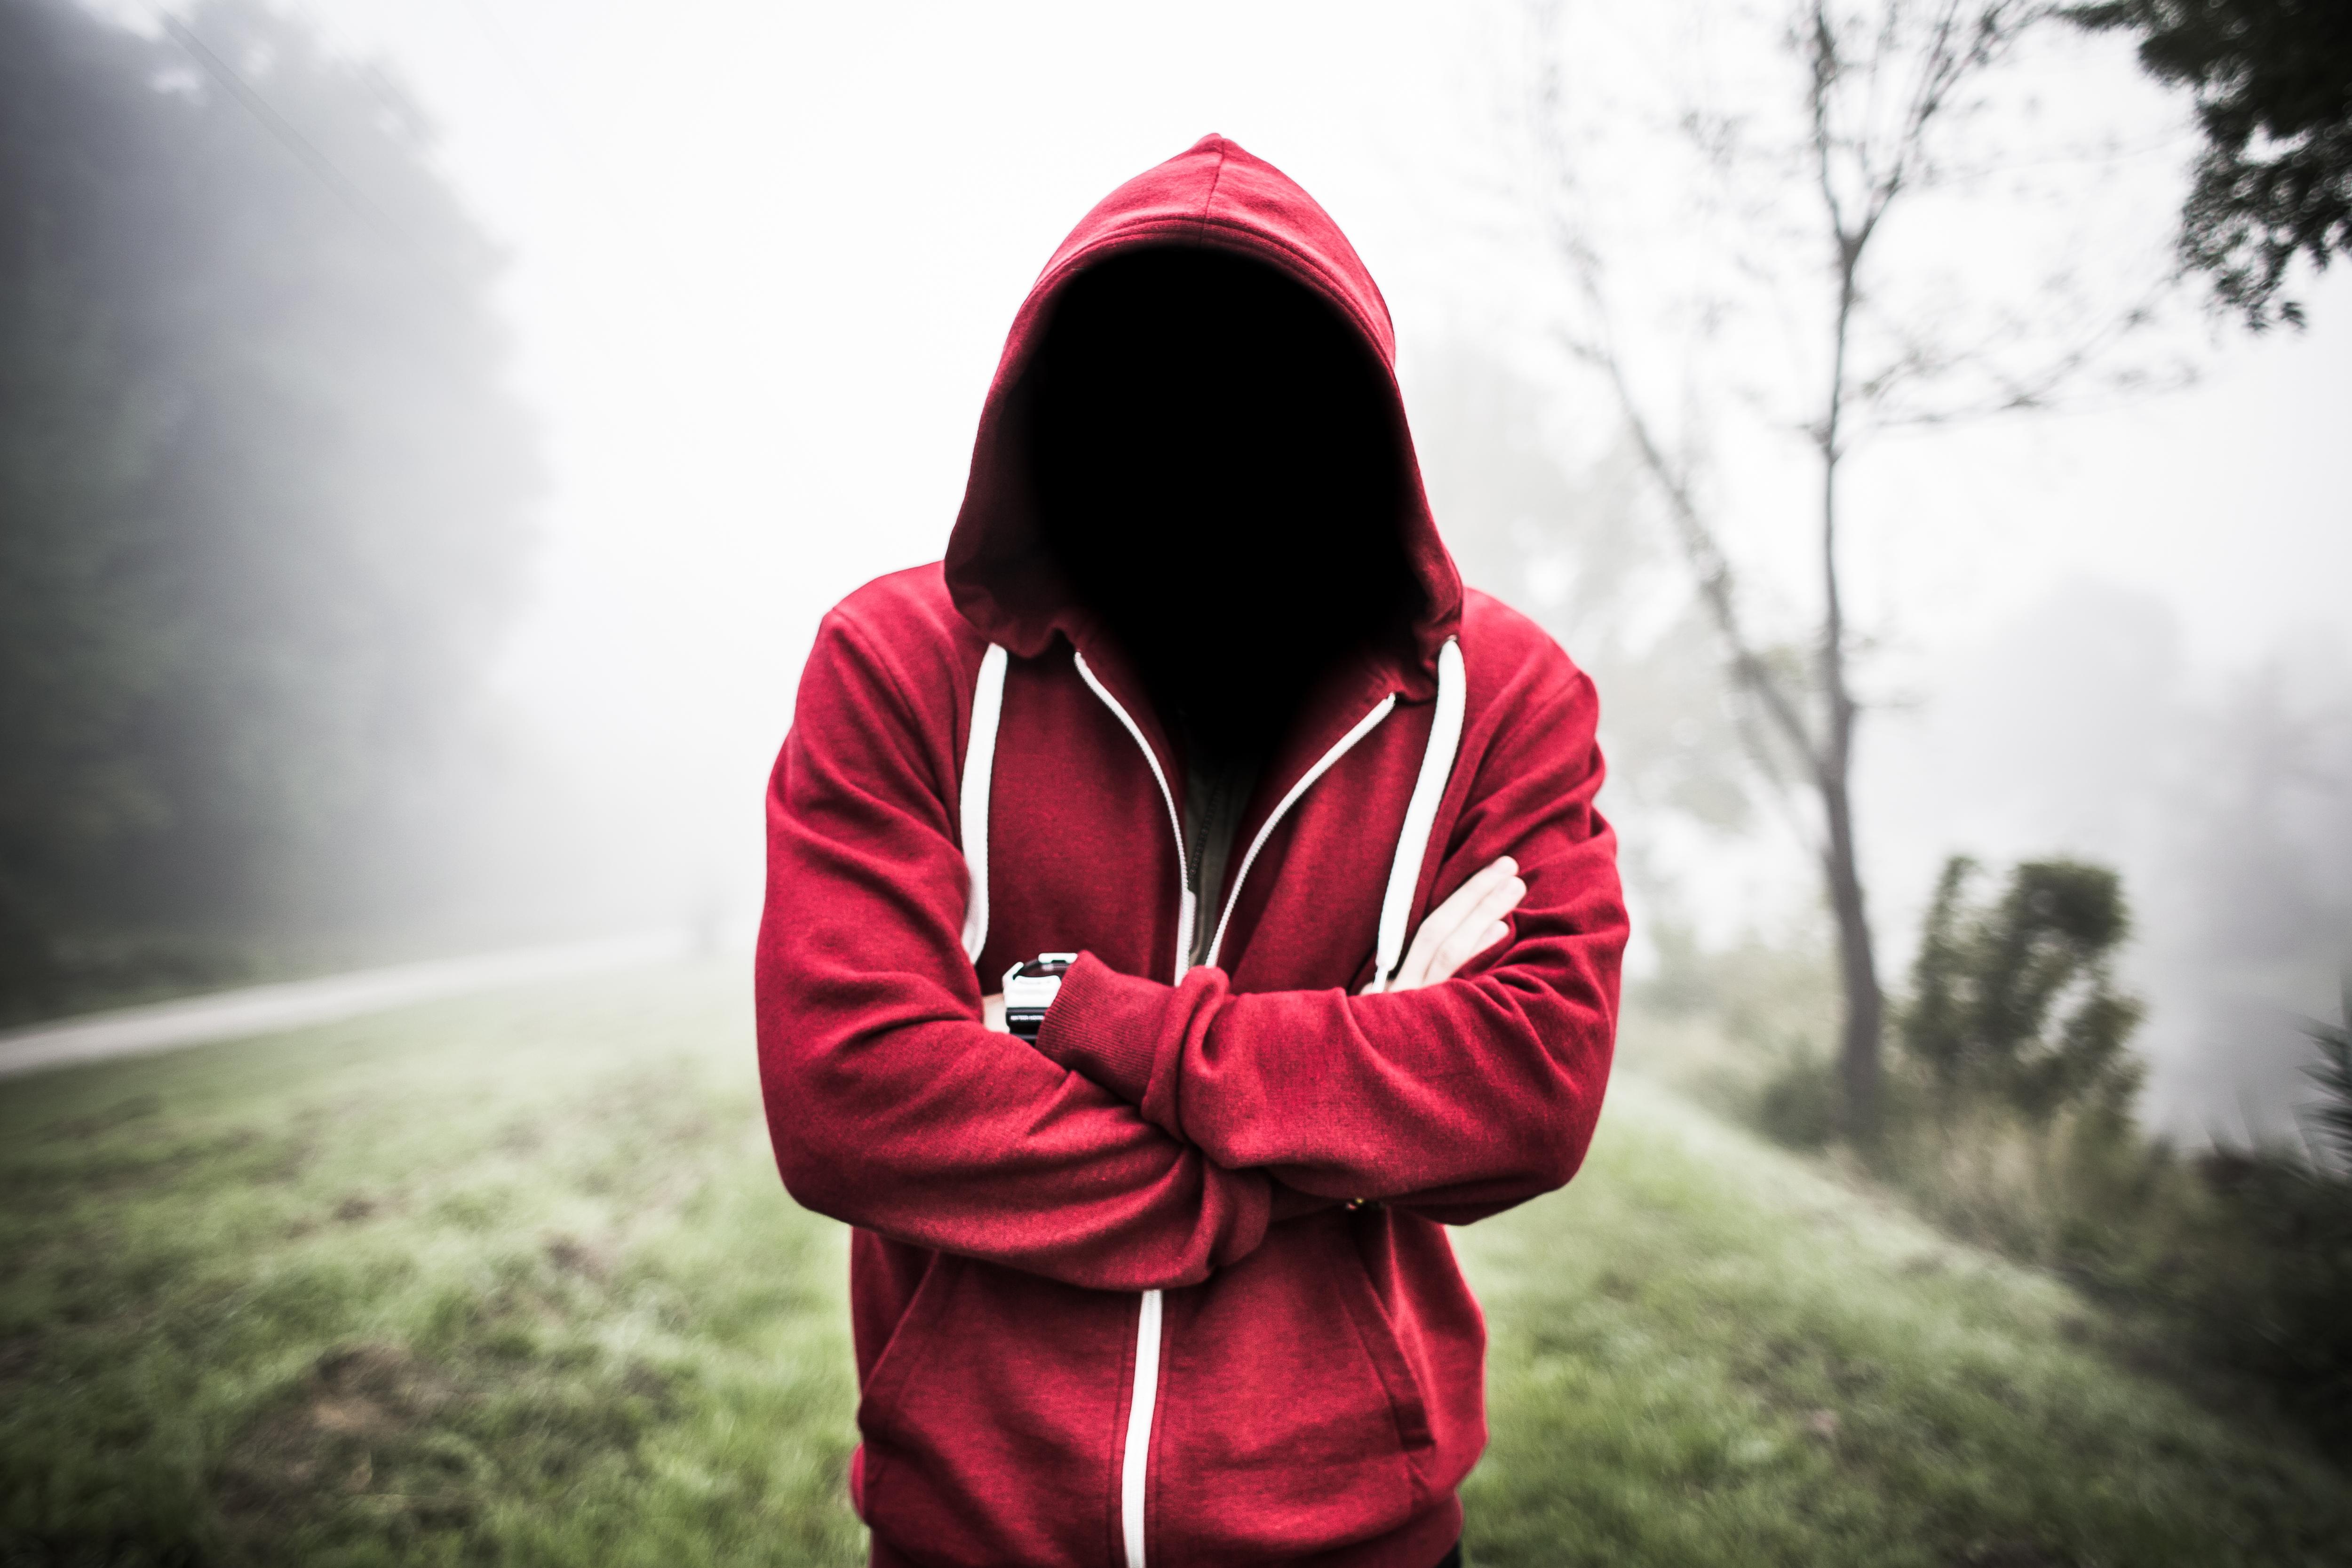 Creepy Man Without a Face in a Hoodie Free